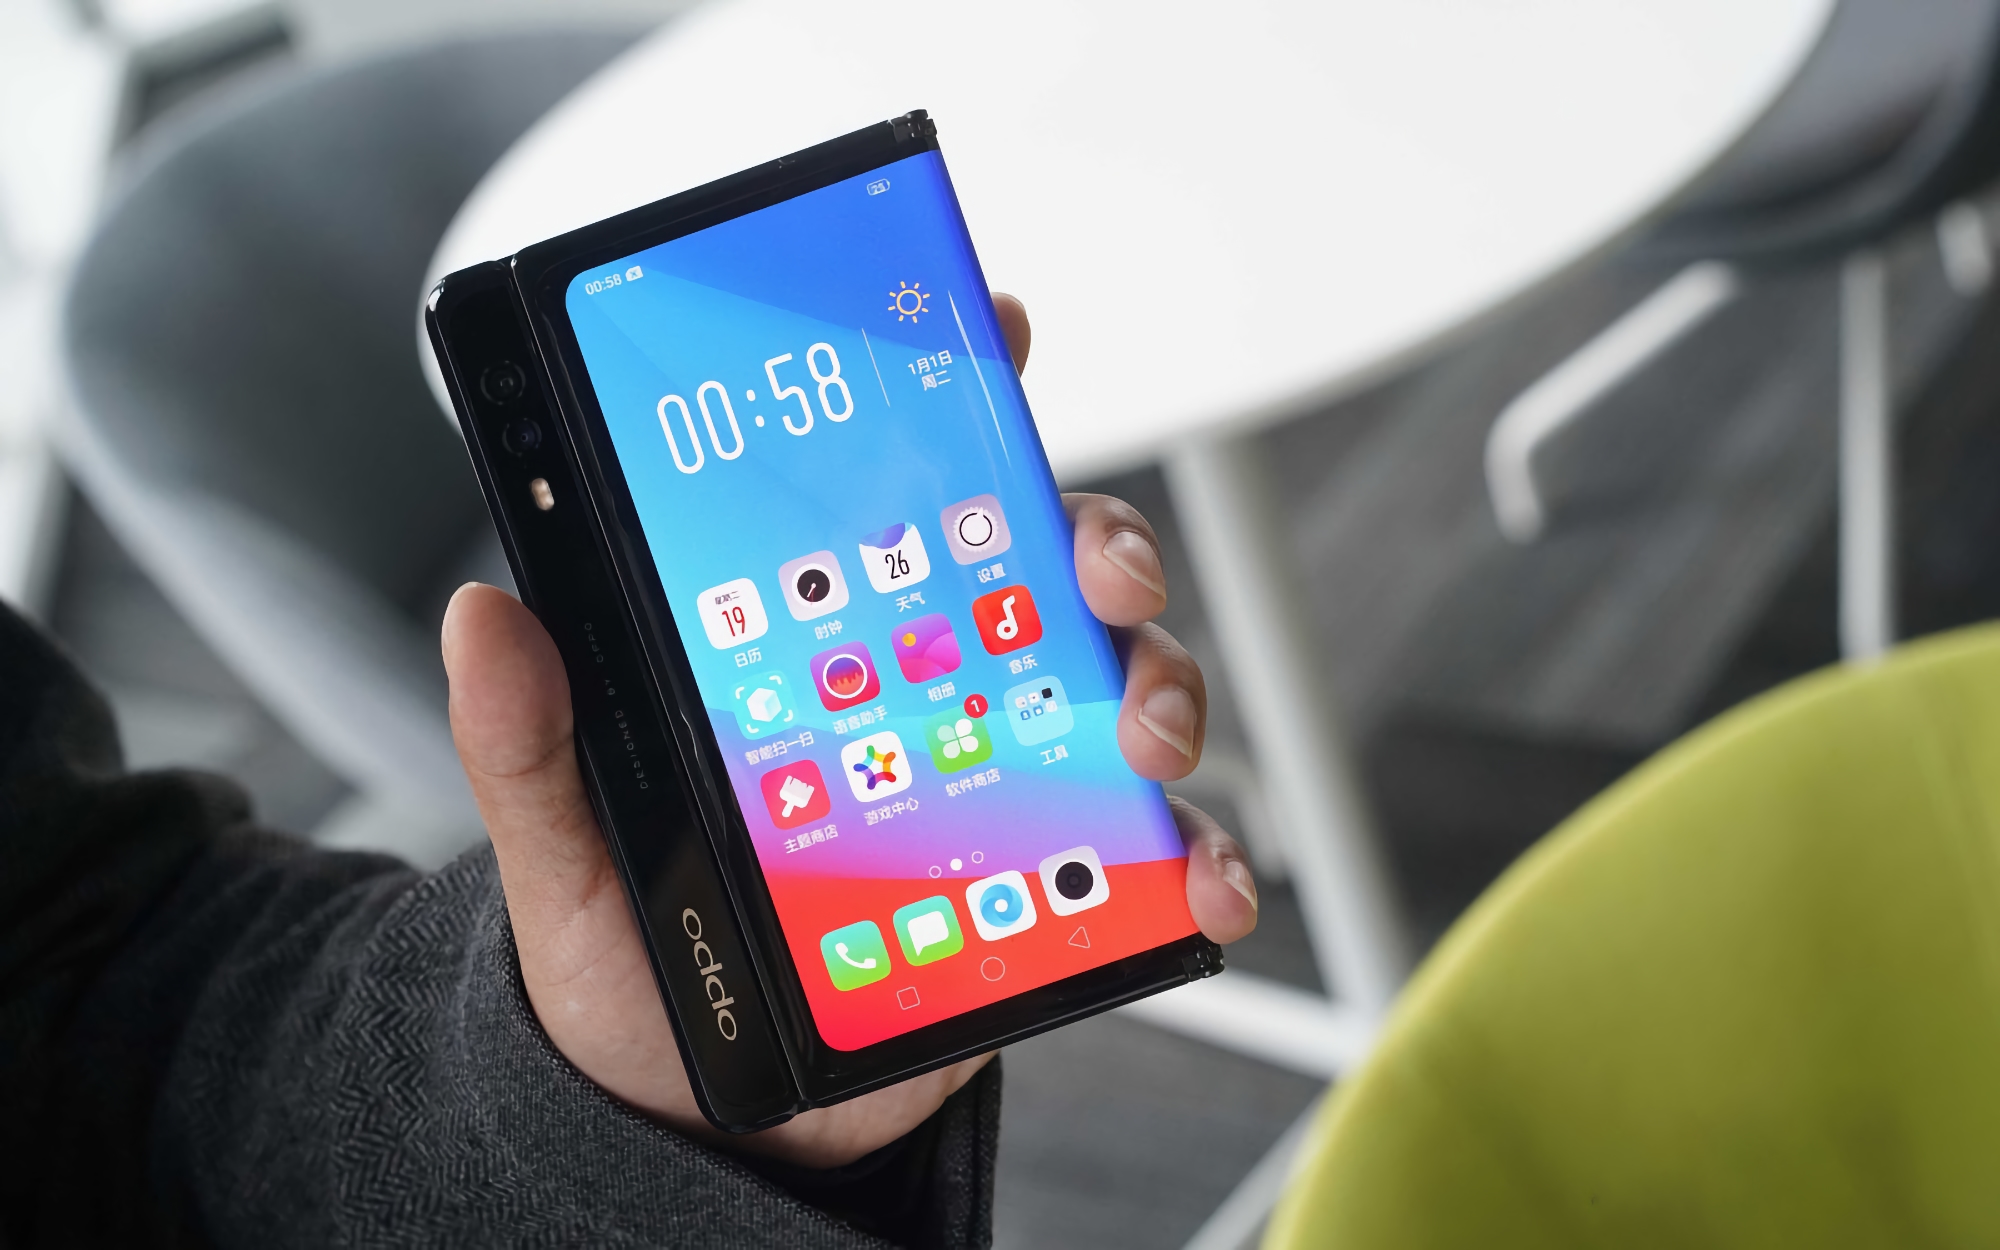 Rumor: OPPO's first foldable smartphone to be unveiled next month